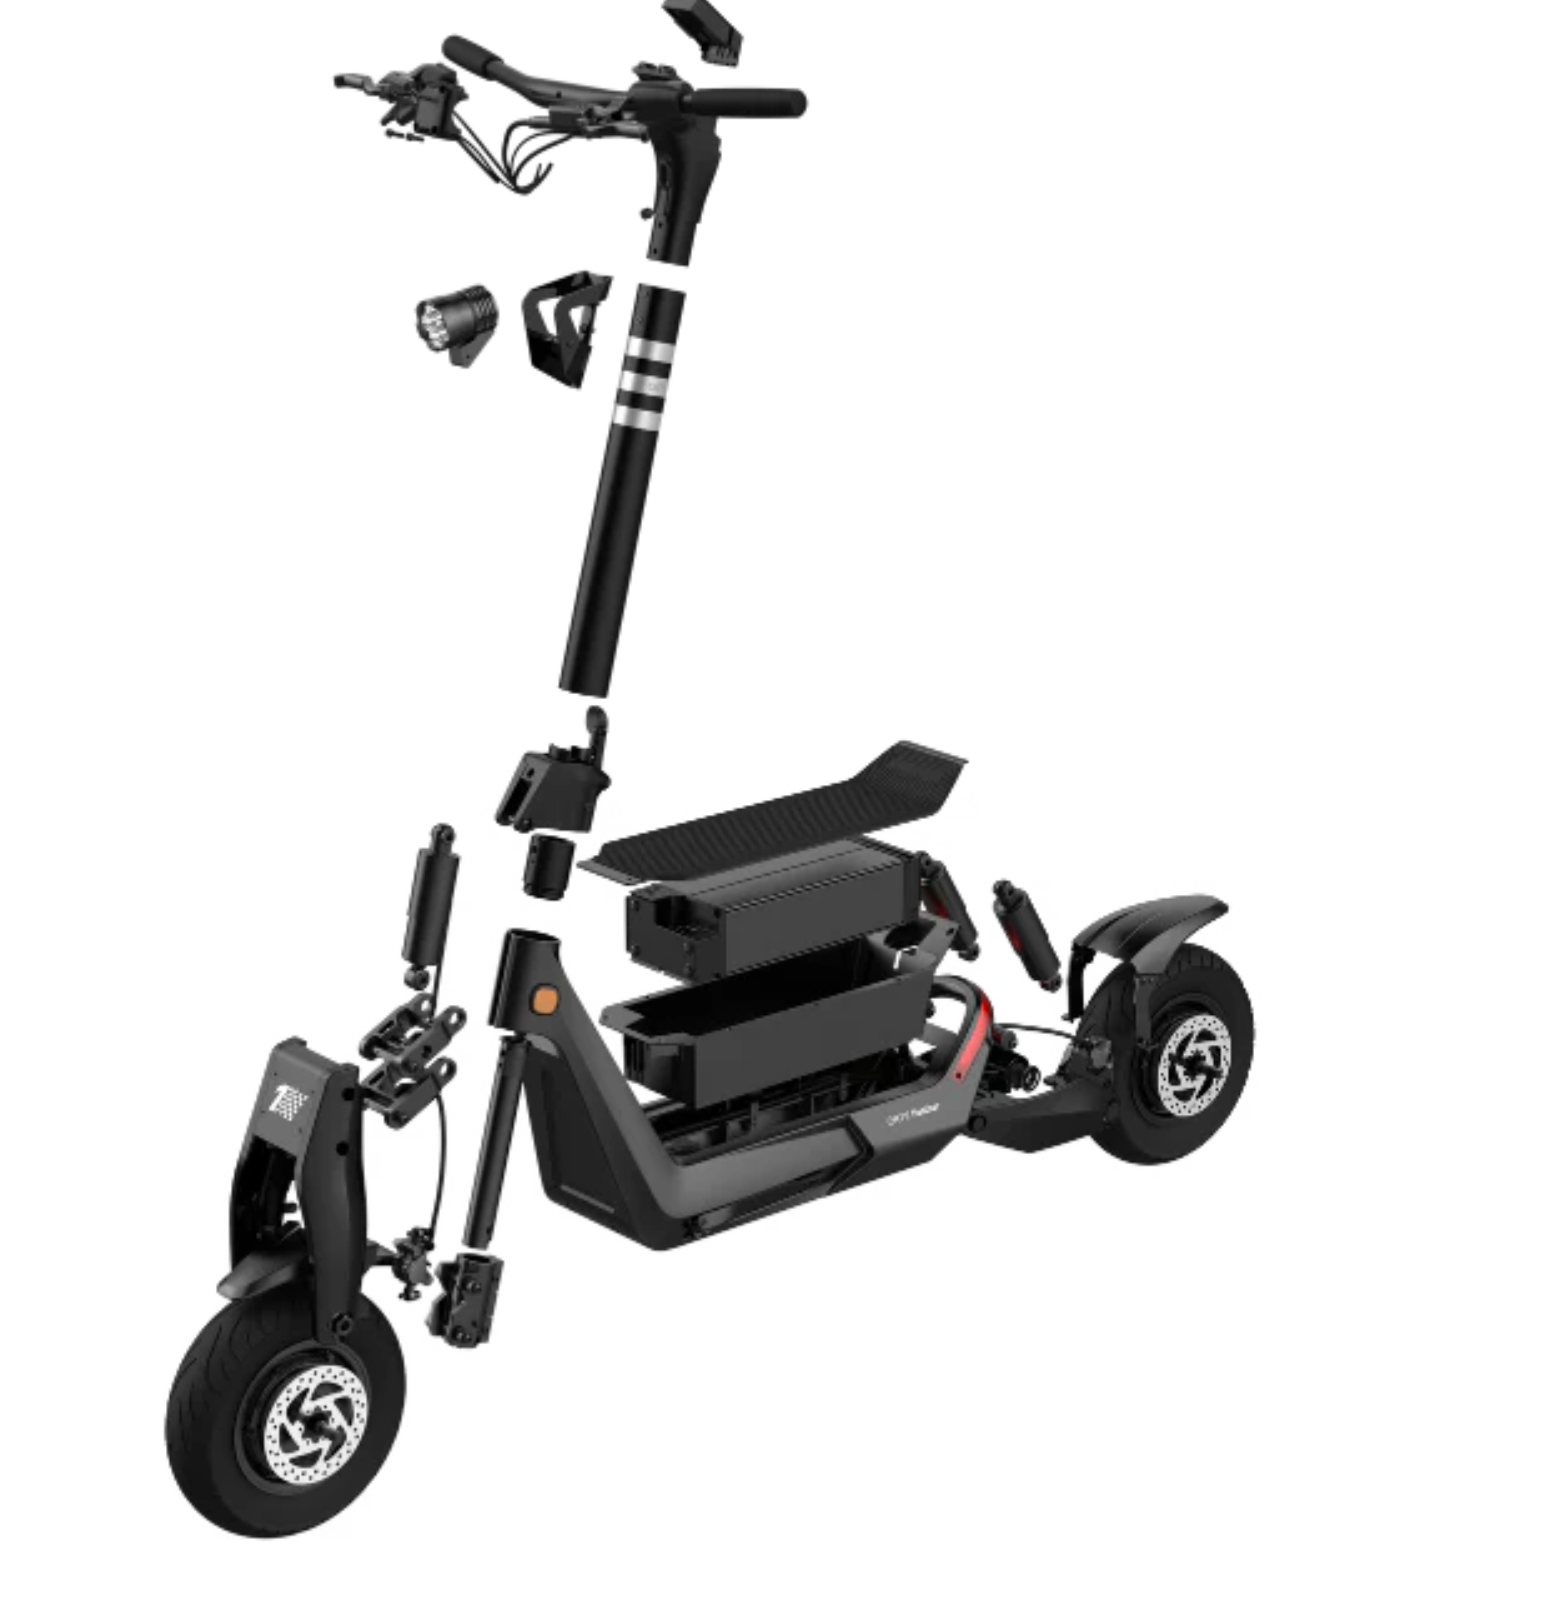 OKAI Panther ES800 Off Road Electric Scooter